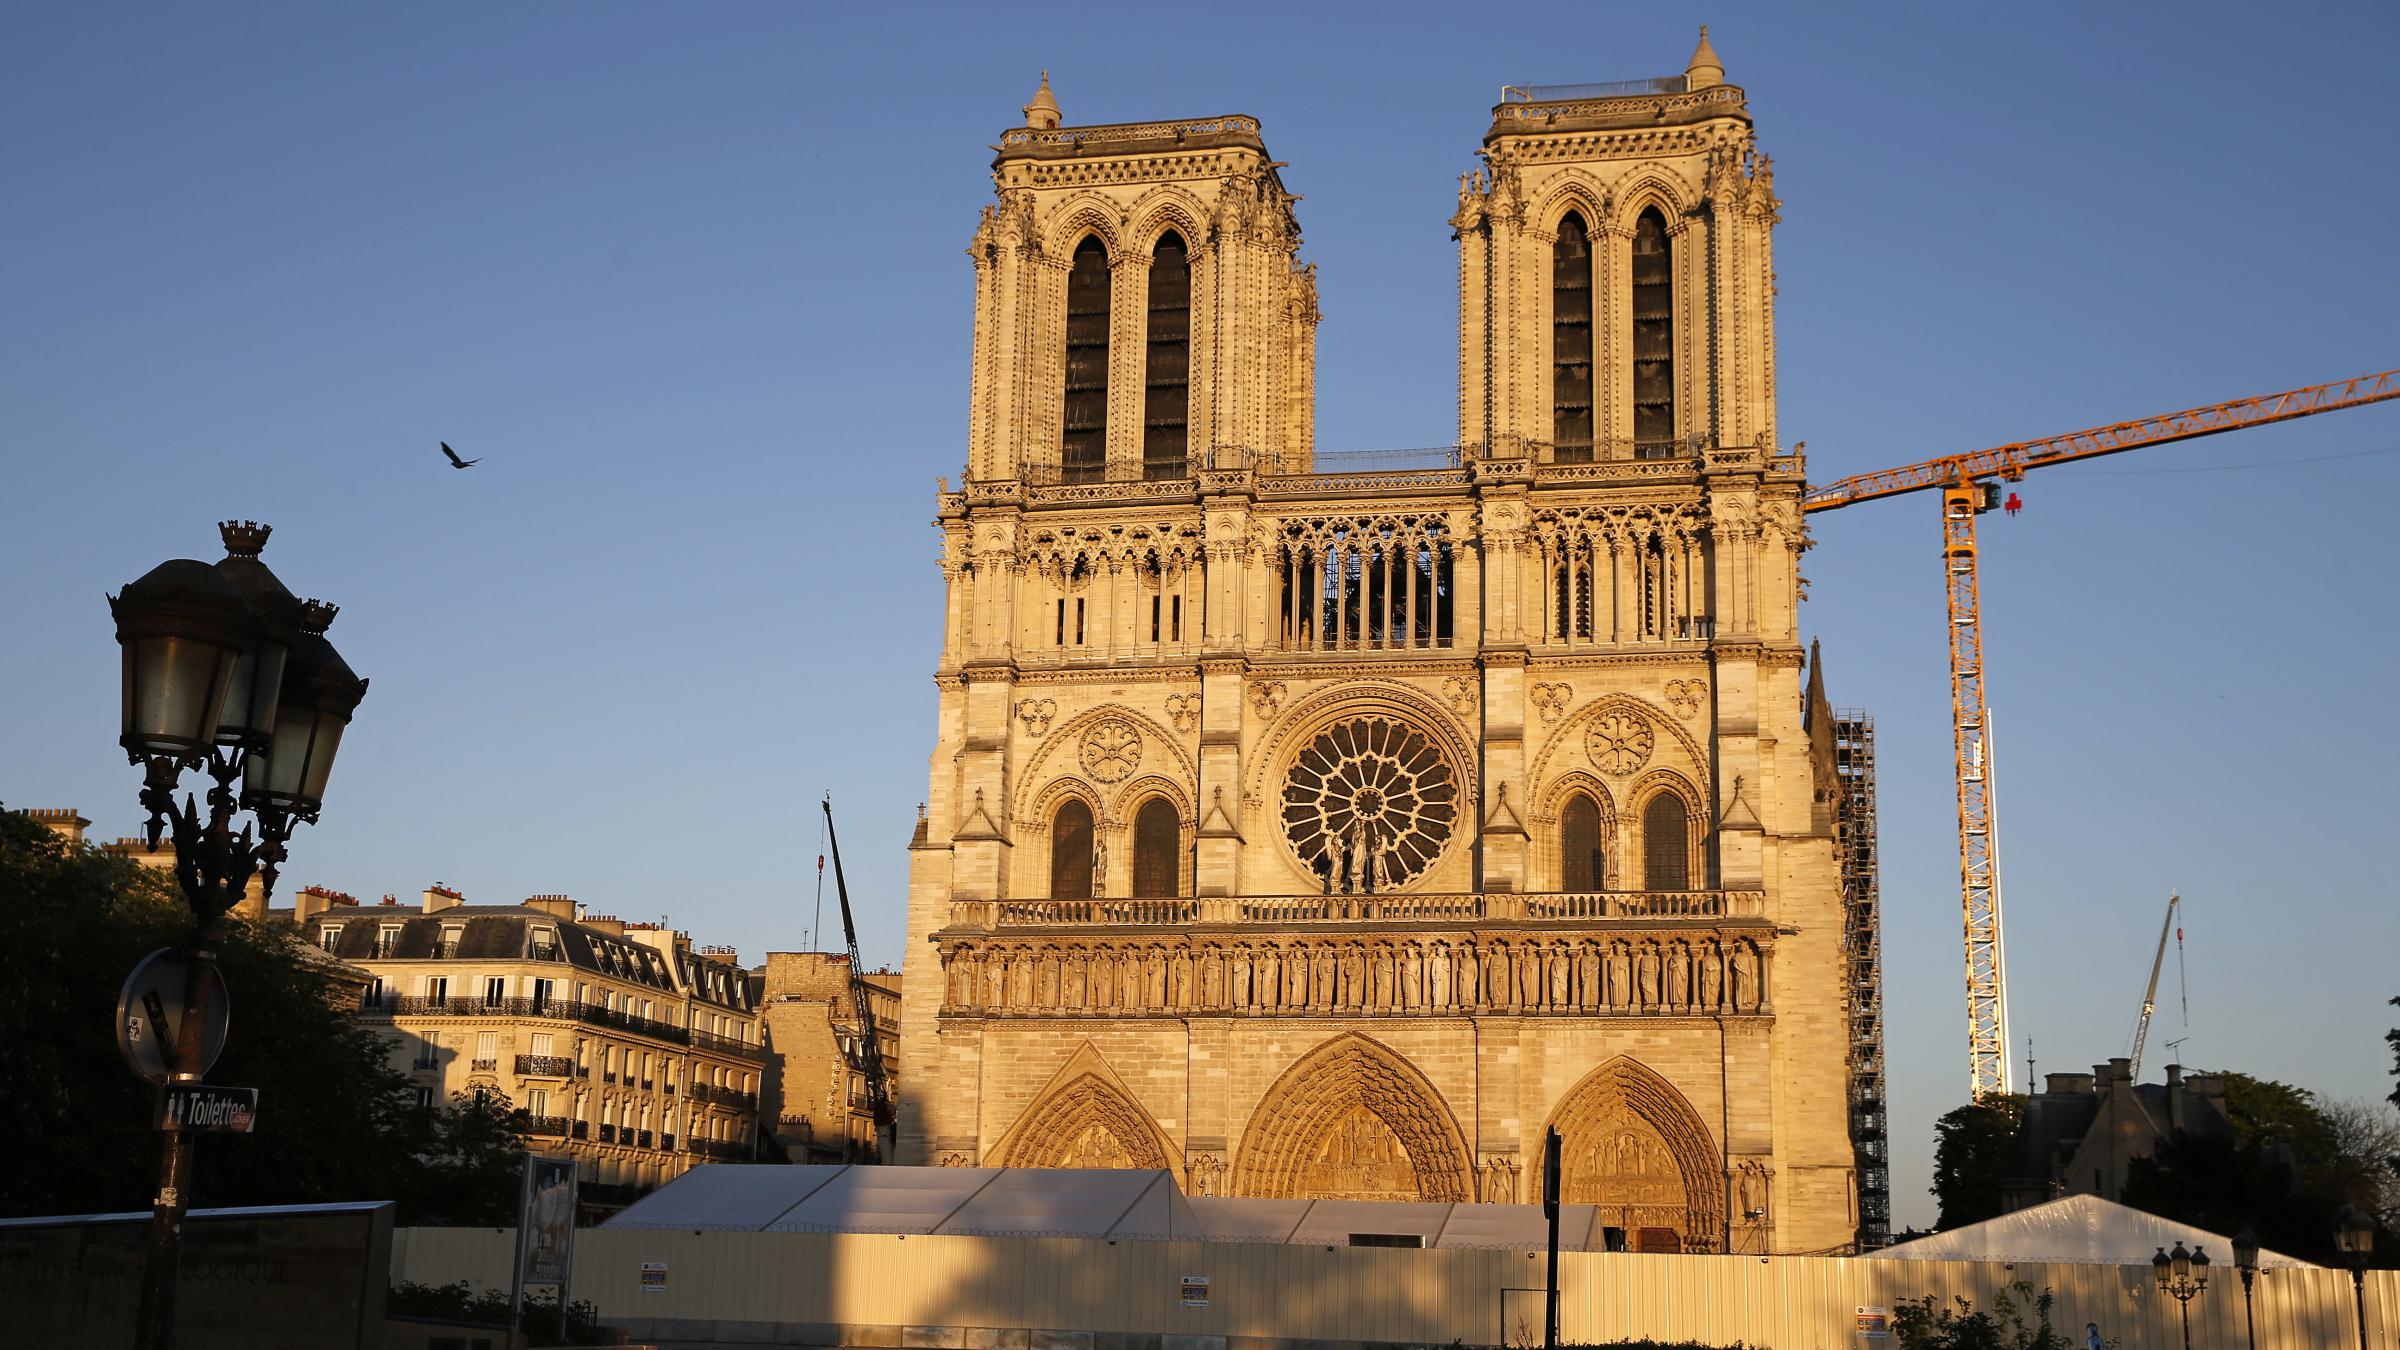 On Fire Anniversary, Notre Dame Bell Rings But Pandemic Has Stopped